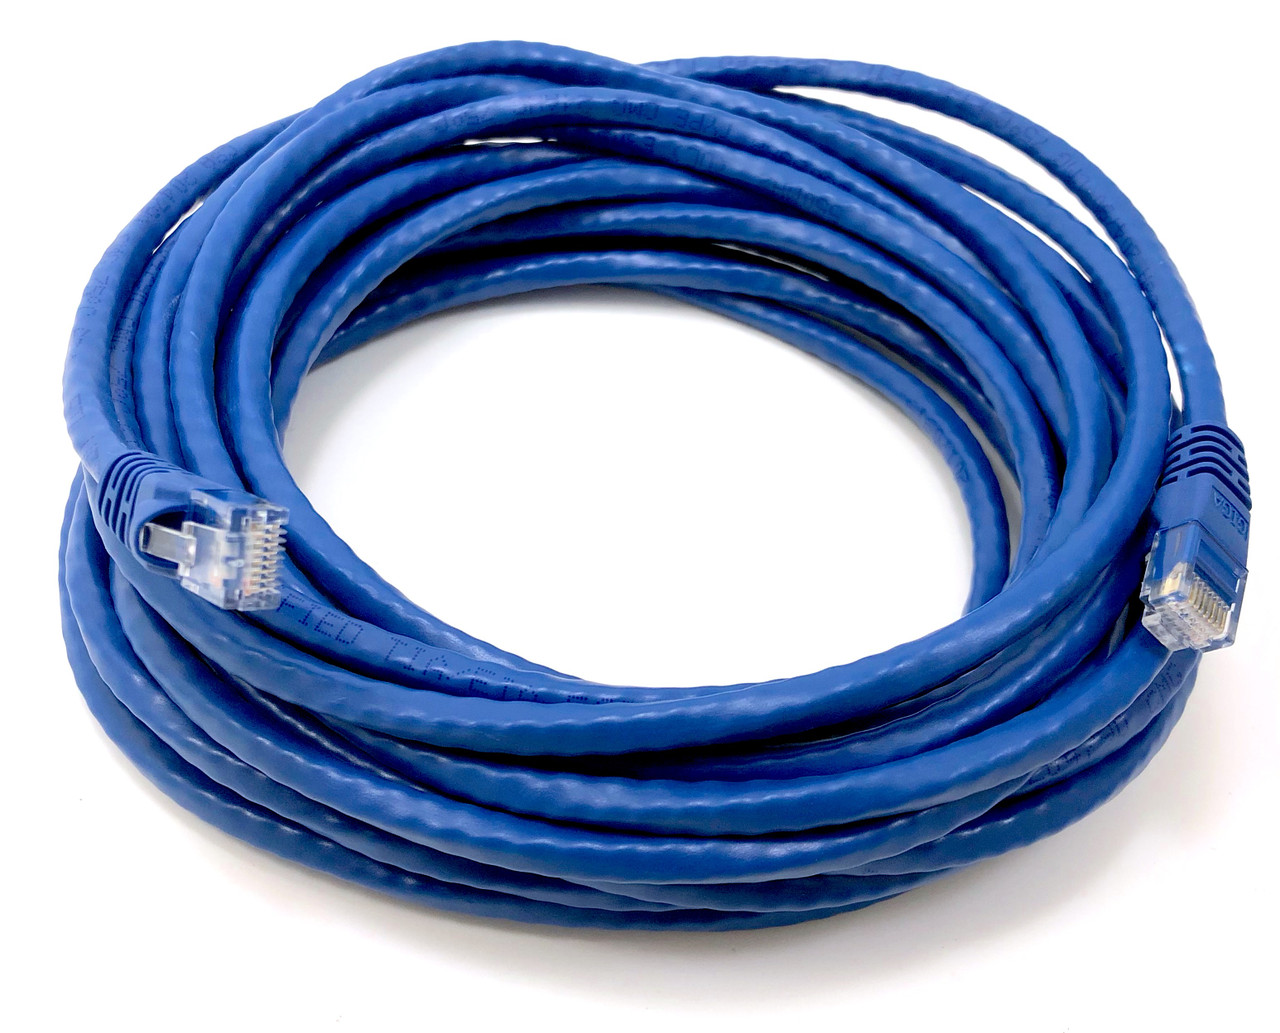 25ft Cat6 Molded Snagless RJ45 UTP Networking Patch Cable - Blue (10 Pack)